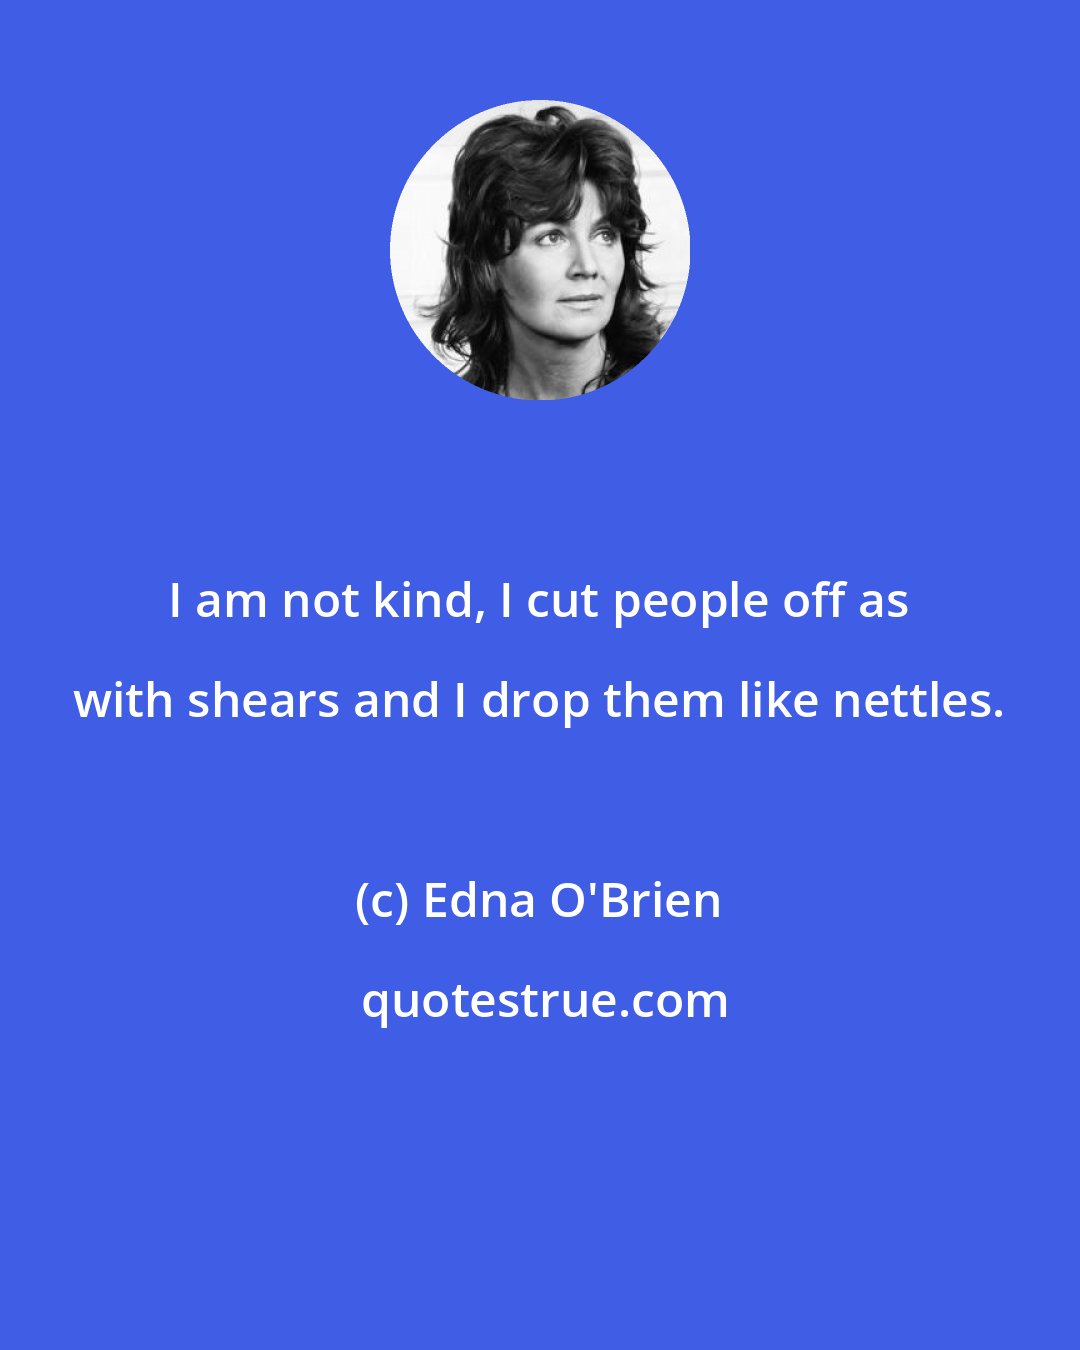 Edna O'Brien: I am not kind, I cut people off as with shears and I drop them like nettles.